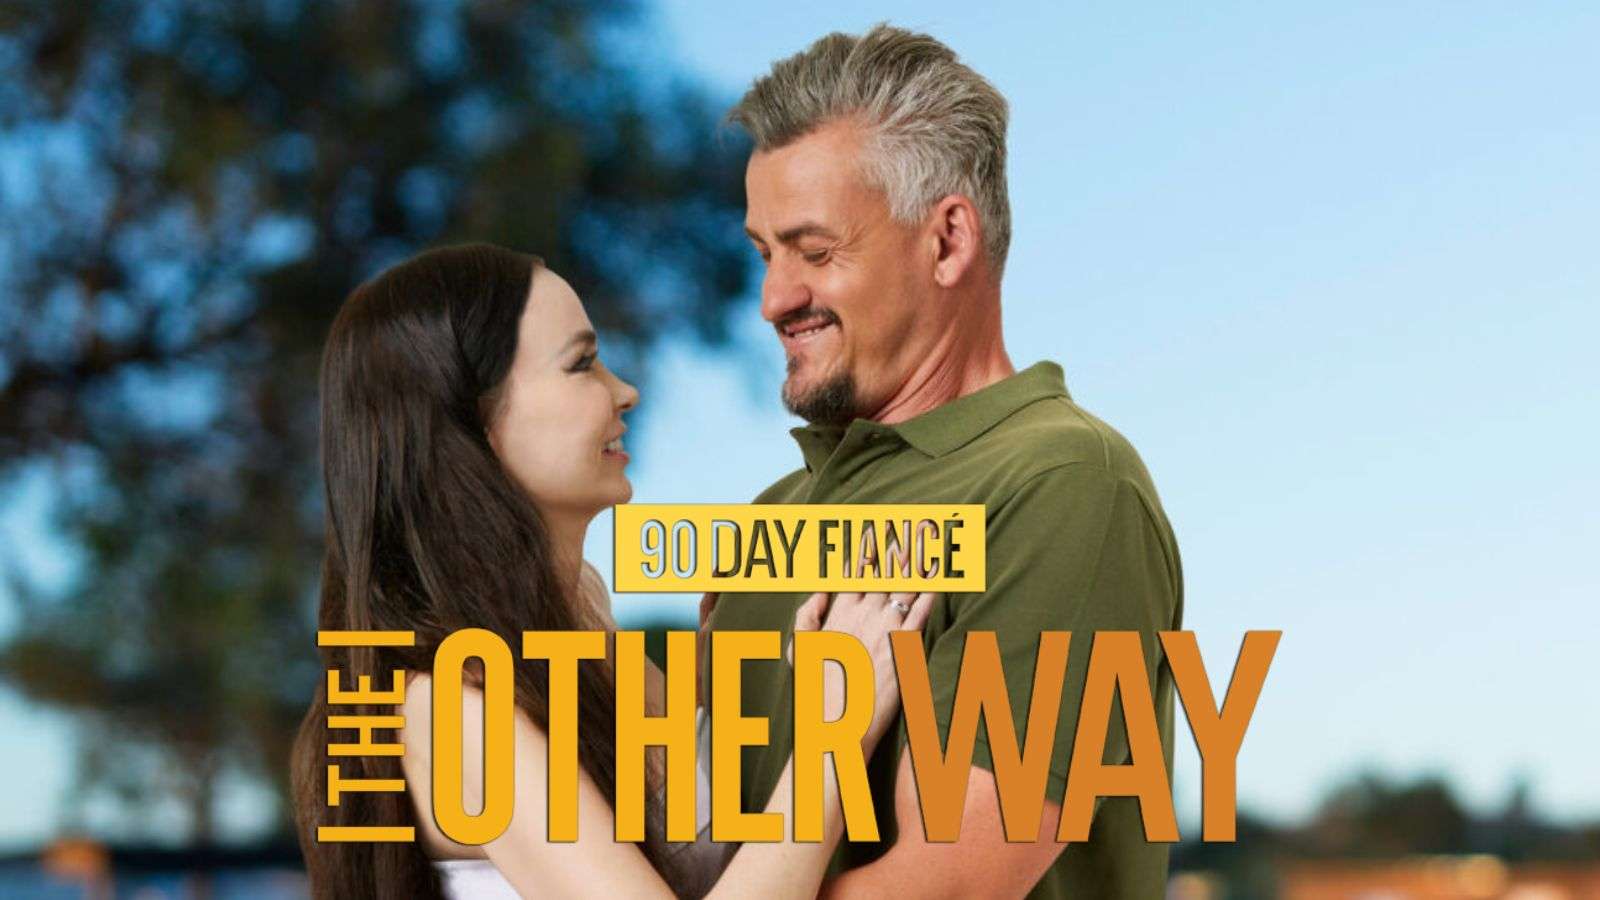 Holly and Wayne from 90 Day Fiancé: The Other Way